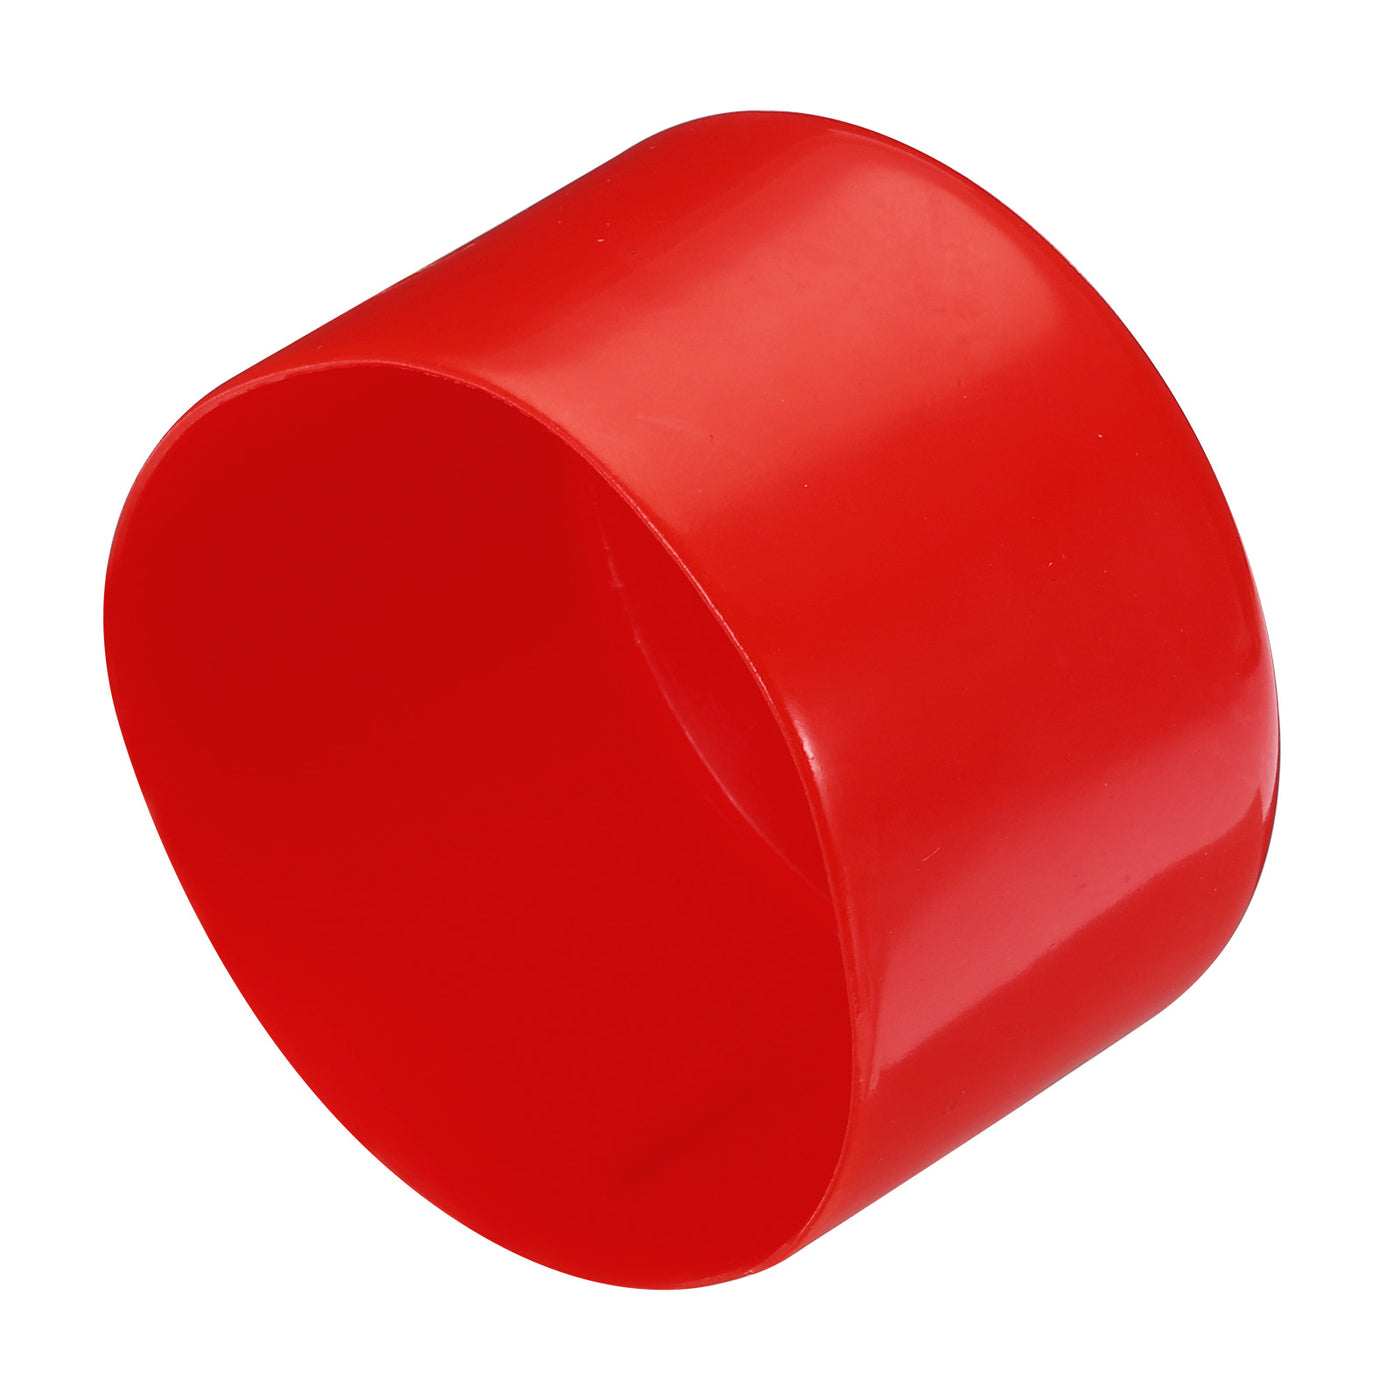 uxcell Uxcell 2pcs Rubber End Caps 80mm ID Vinyl Round Tube Bolt Cap Cover Screw Thread Protectors Red